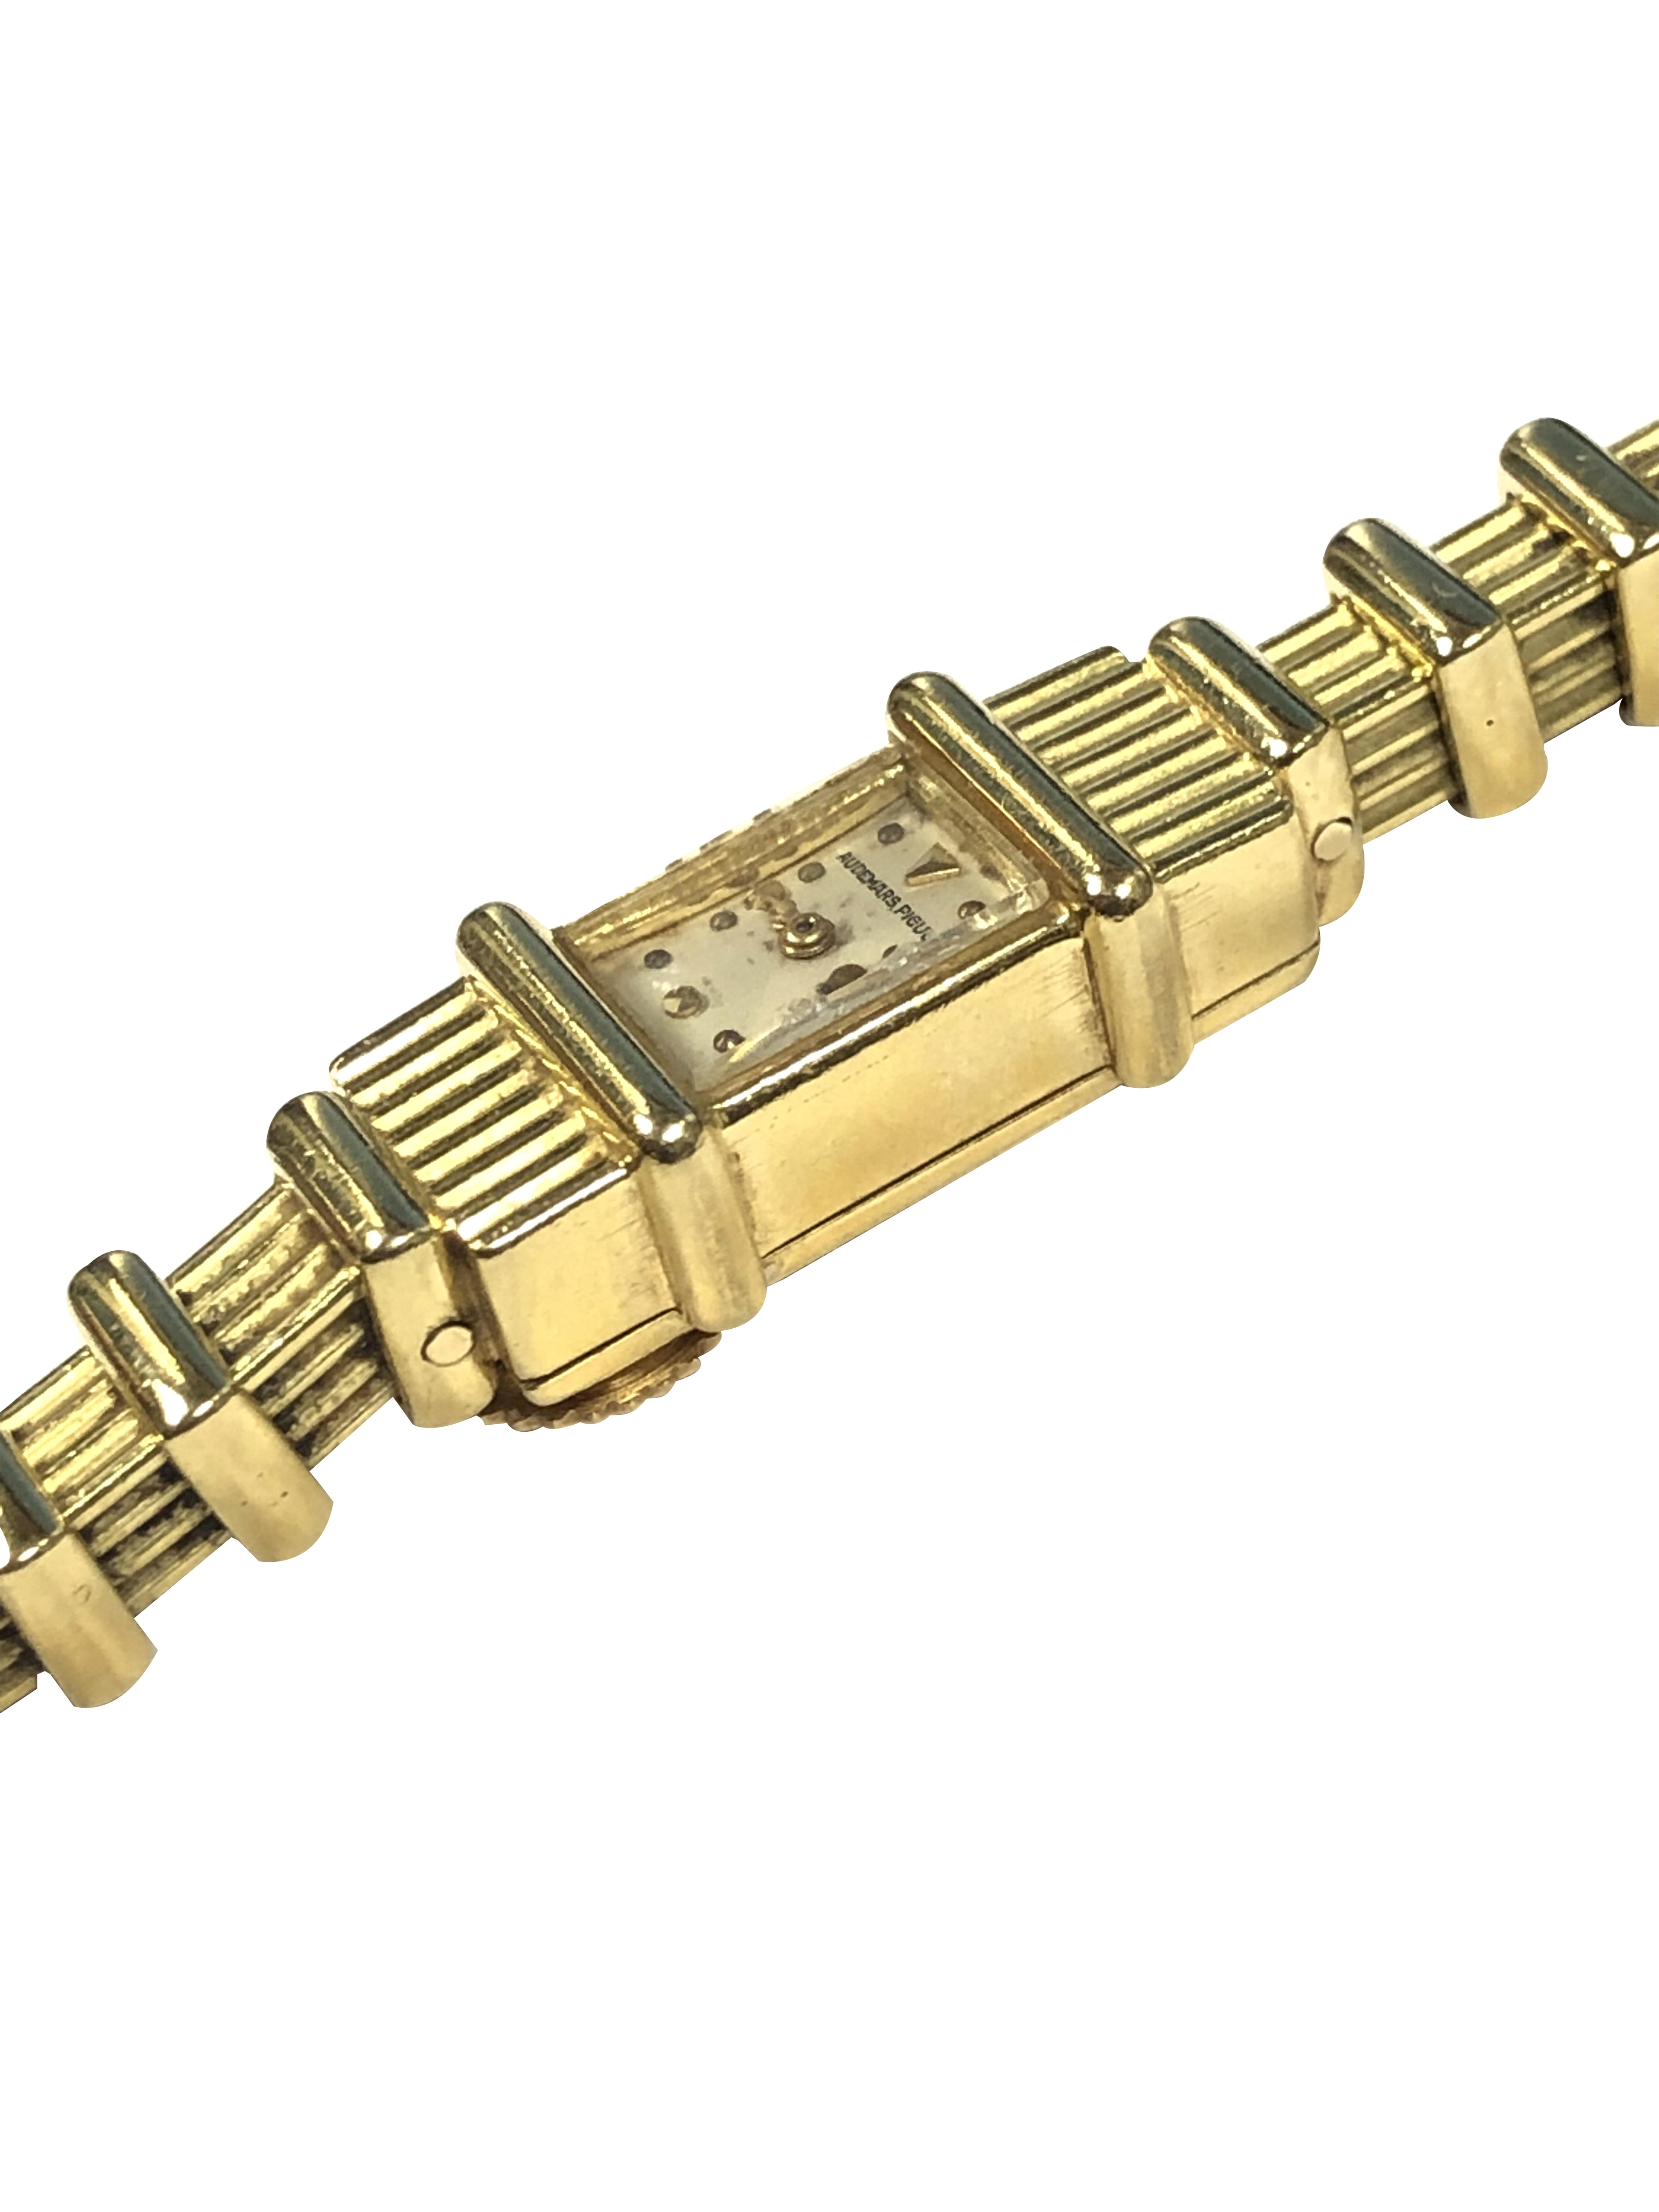 Circa 1940s Audemars Piguet Ladies 18K Yellow Gold Bracelet Wrist Watch, measuring 6 7/8 inches in length and 1/4 inch wide, a very soft and flexible integrated link Bracelet. 17 jewel back Wind Mechanical, manual wind, nickle lever movement. White